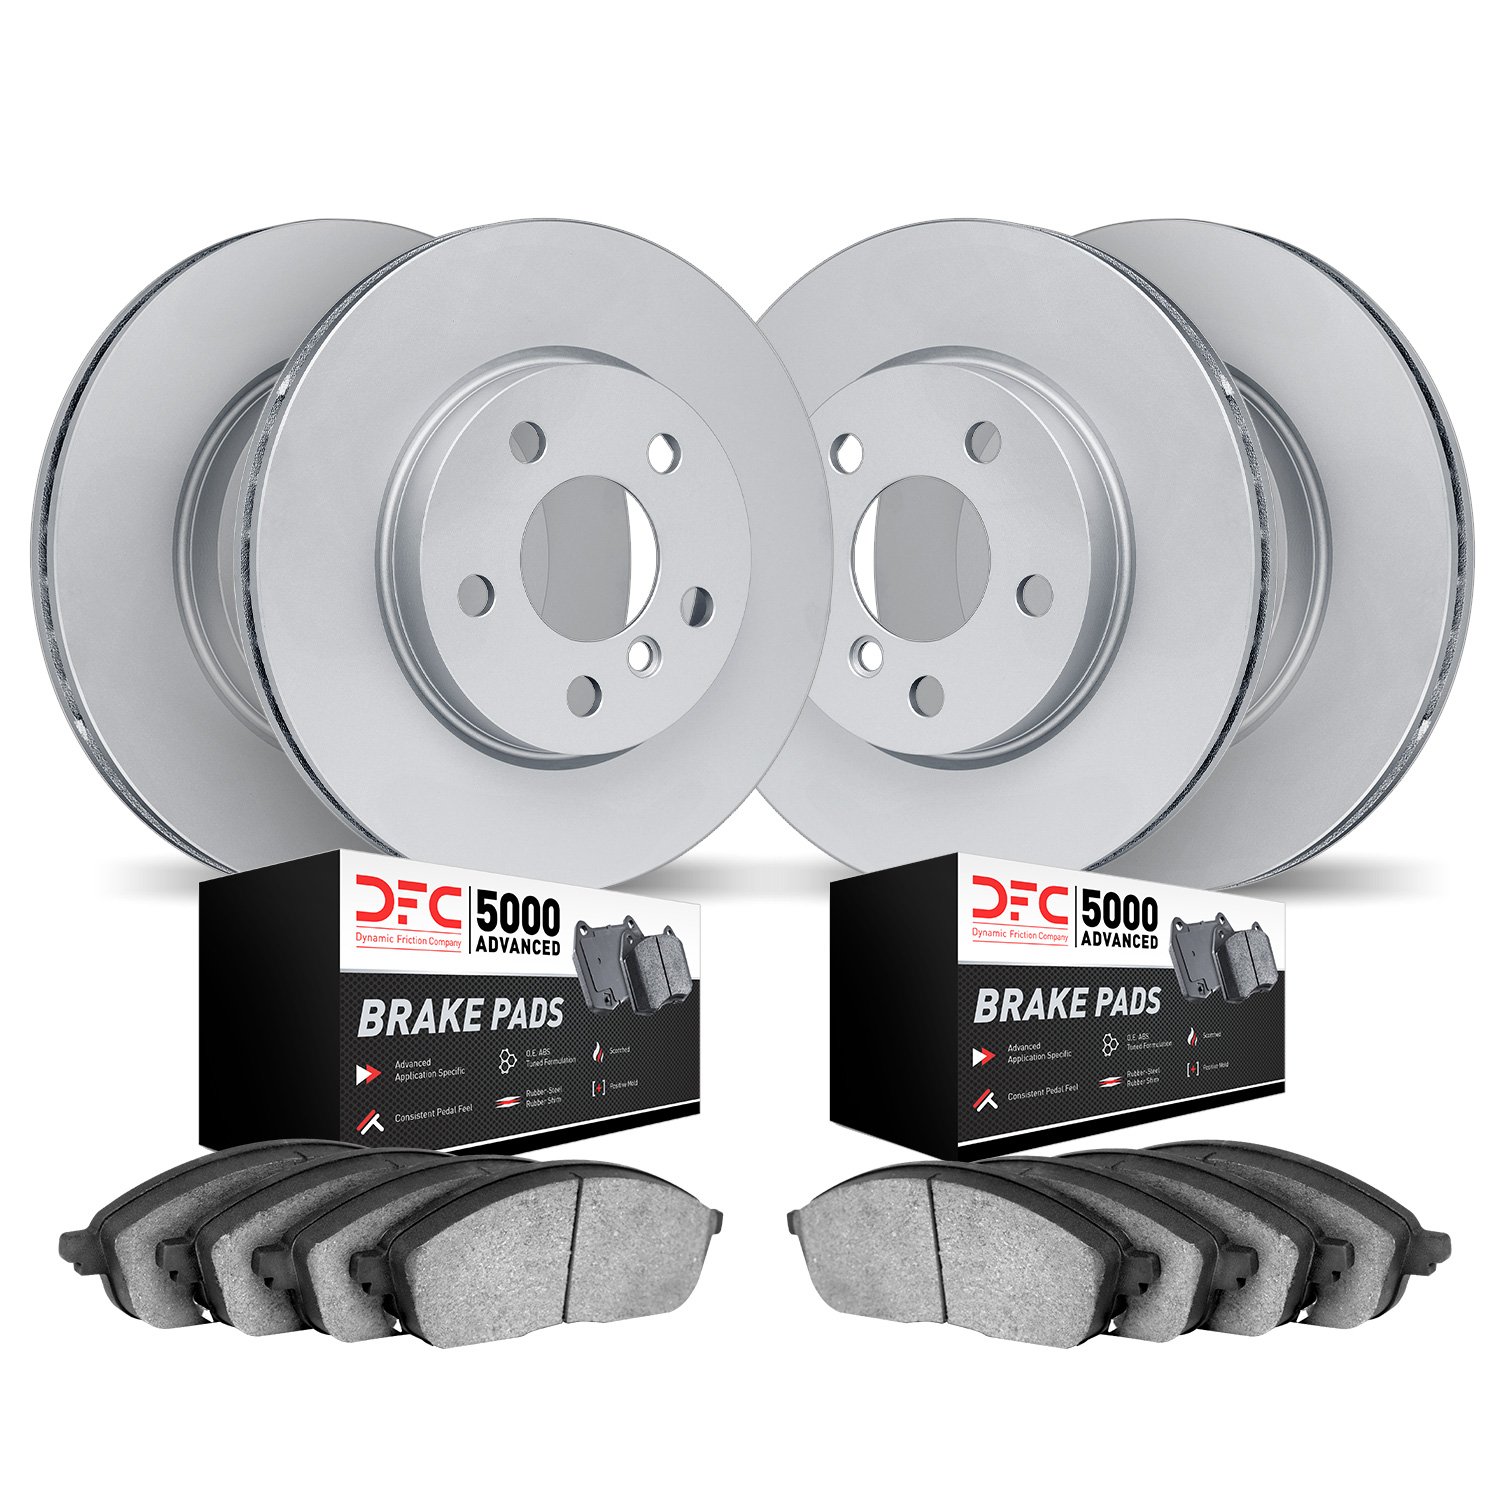 9504-31177 GEOMET Brake Rotors w/5000 Advanced Brake Pads Kit, Fits Select BMW, Position: Front and Rear